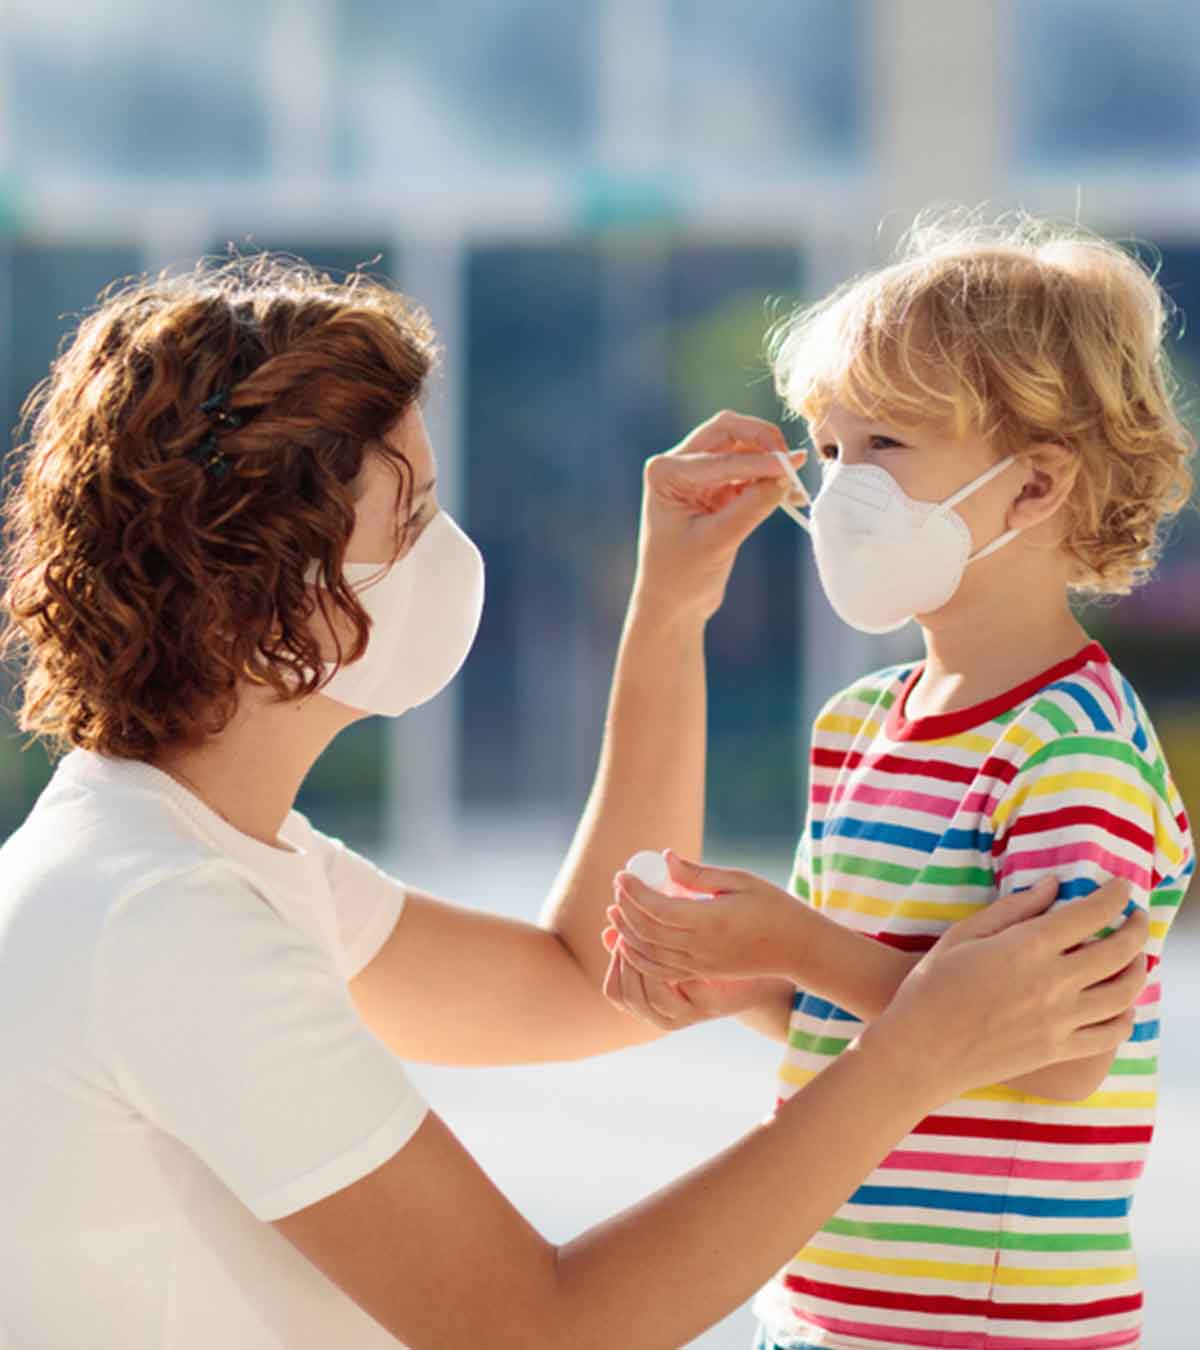 To Mask Or Not To Mask Children To Overcome COVID-19